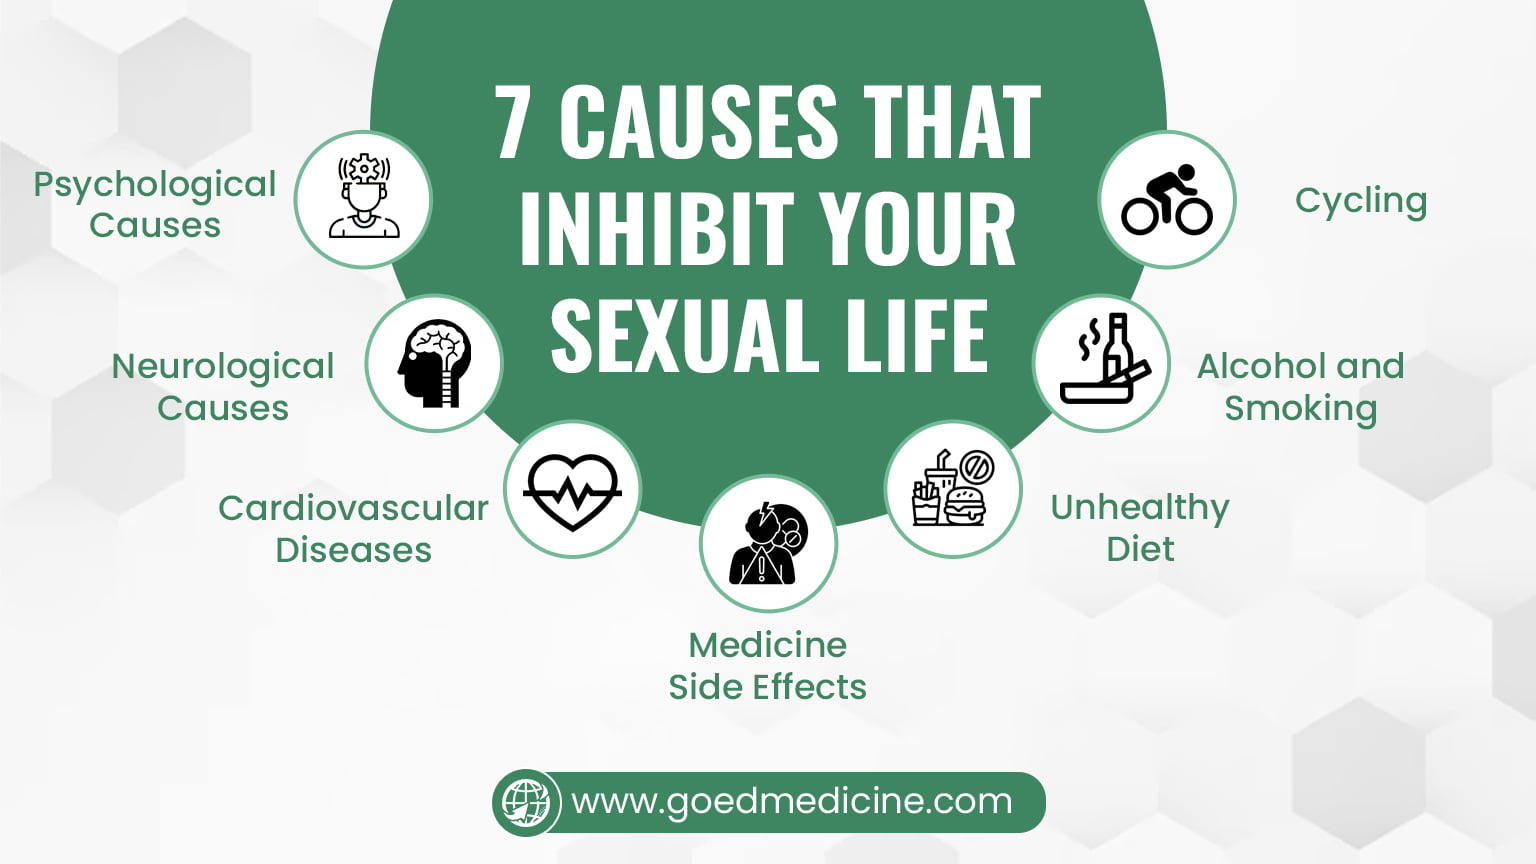 7 Causes that Inhibit Your Sexual Life